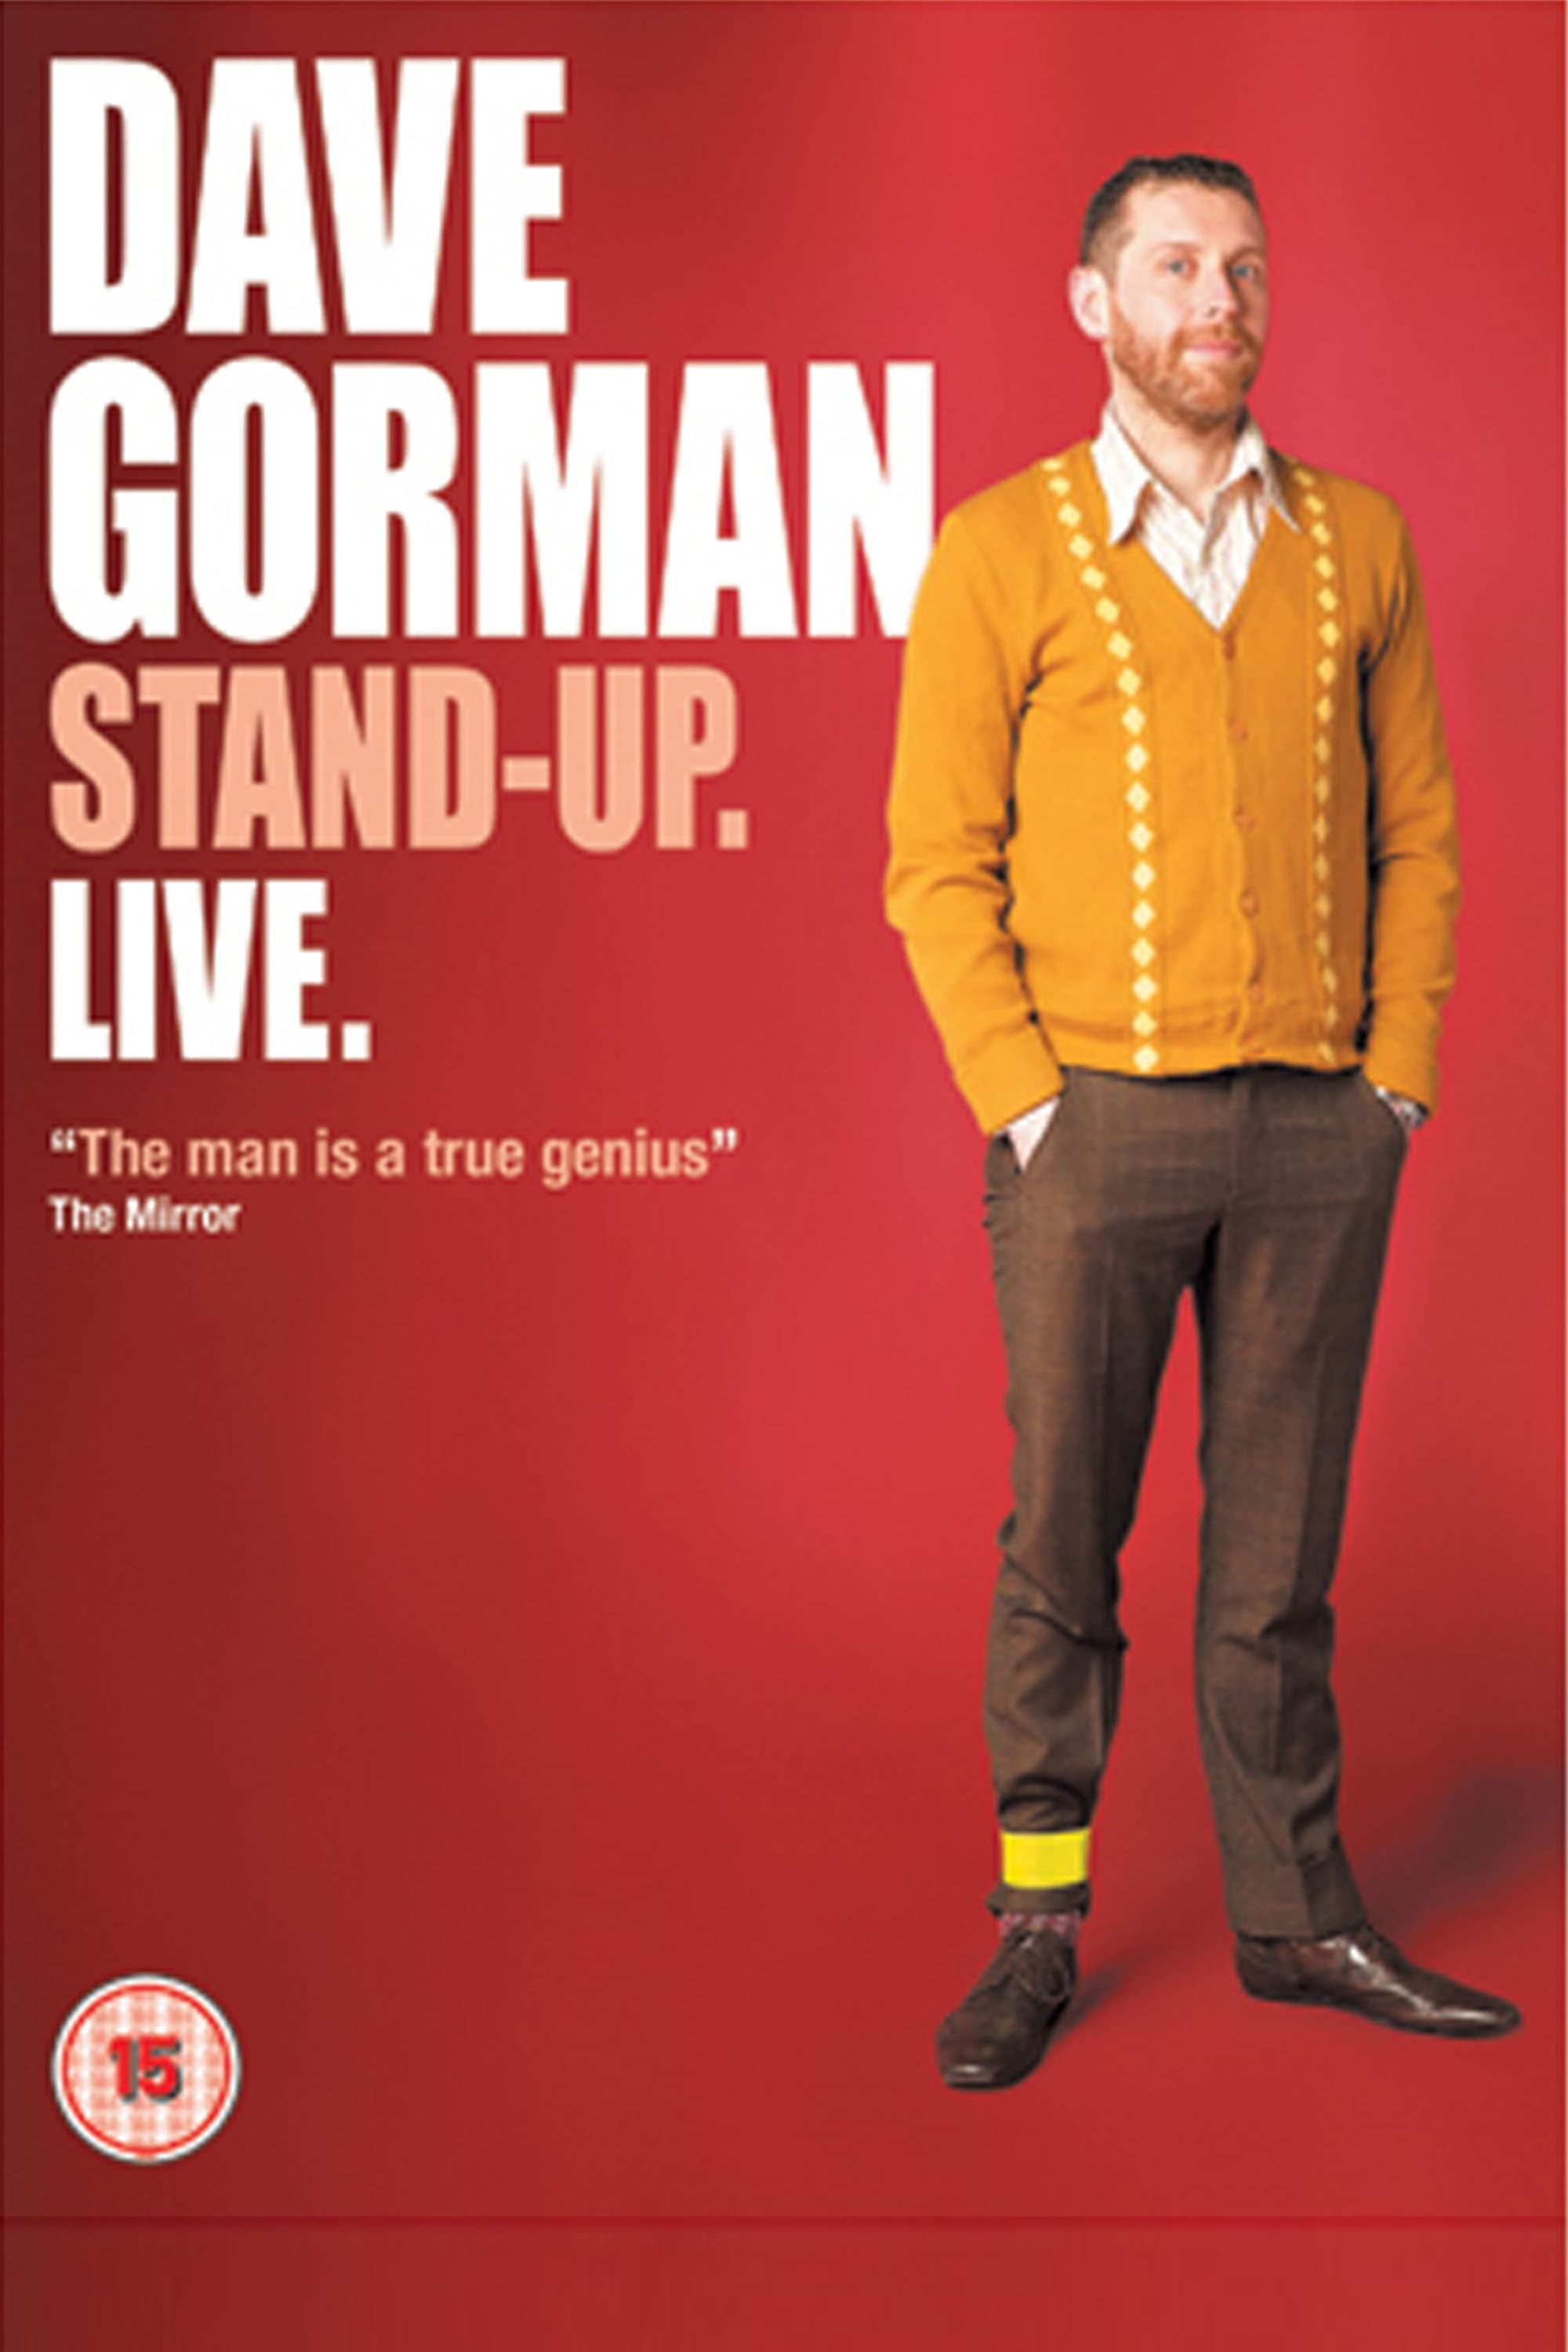 Dave Gorman: Stand-Up. Live.